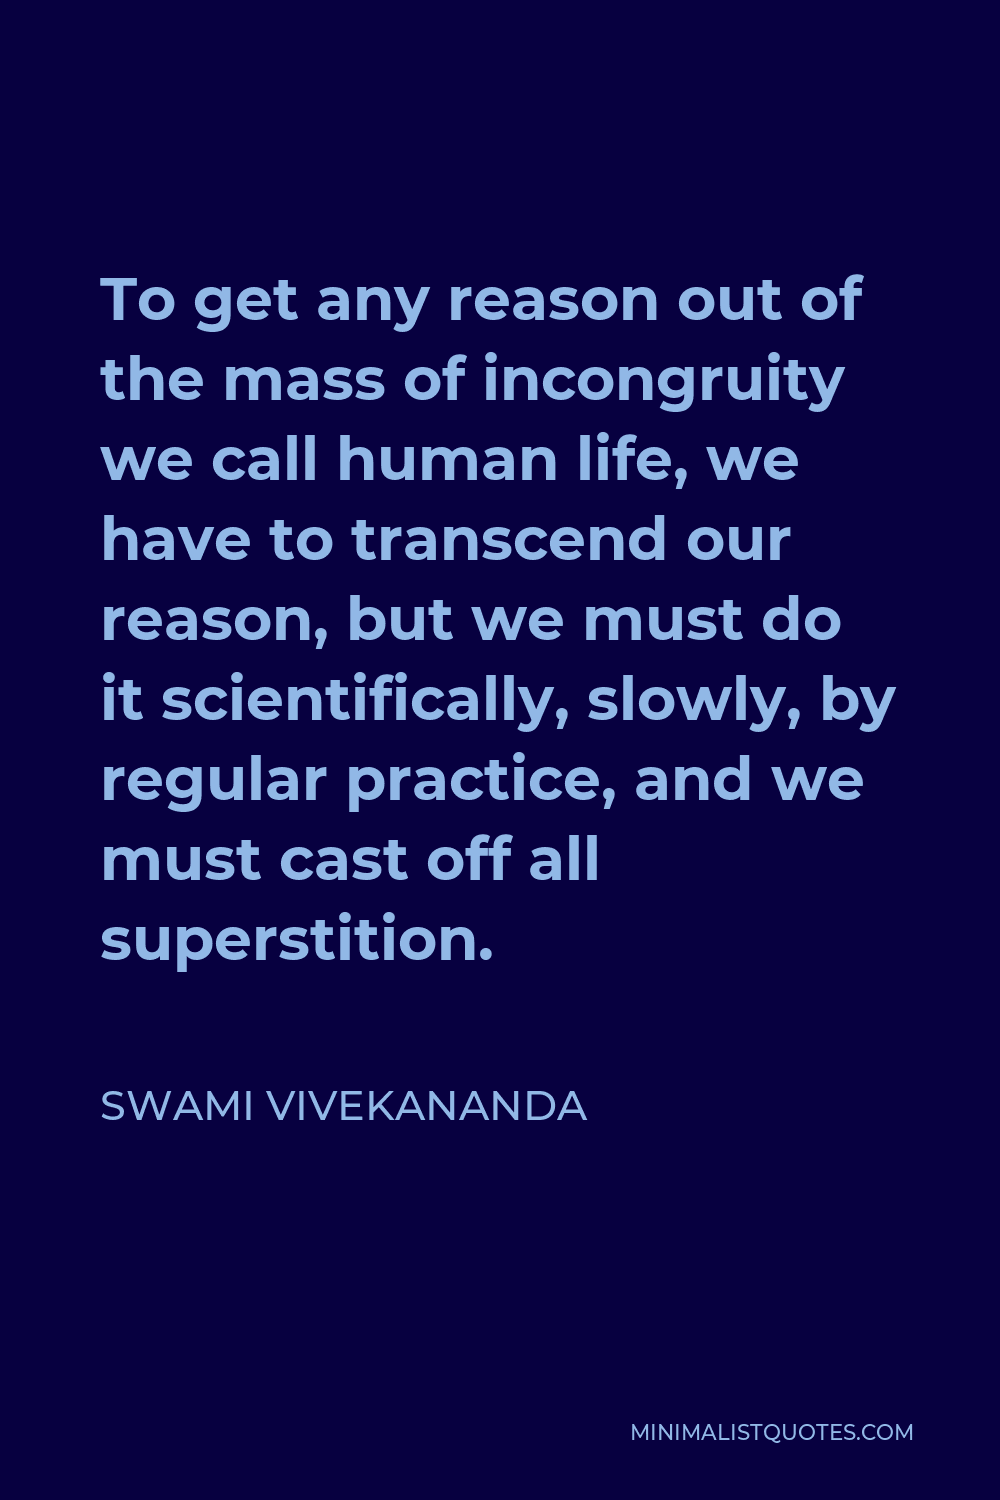 Swami Vivekananda Quote - To get any reason out of the mass of incongruity we call human life, we have to transcend our reason, but we must do it scientifically, slowly, by regular practice, and we must cast off all superstition.